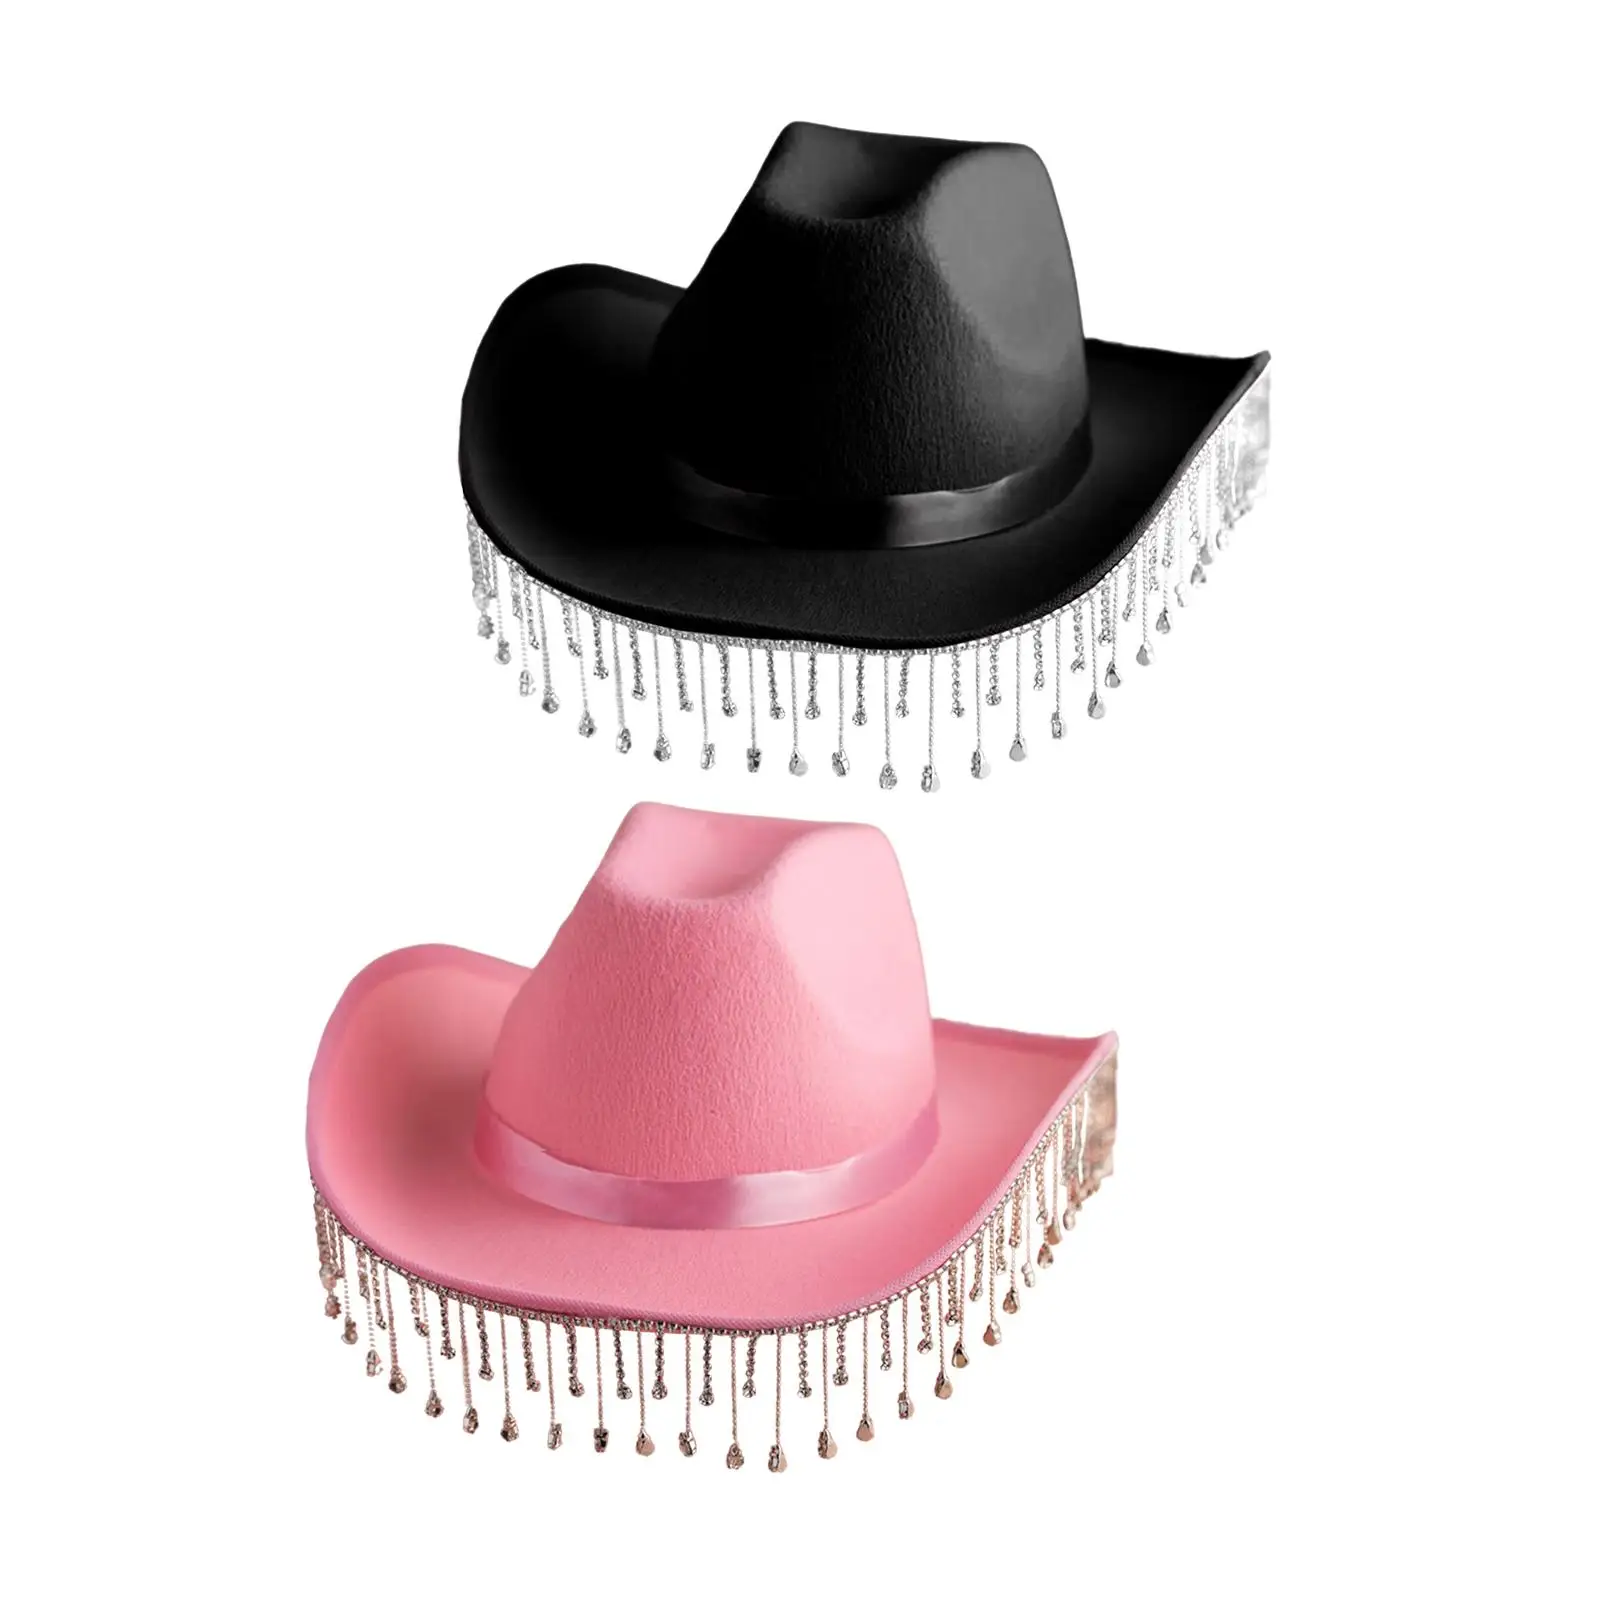 Rhinestone Bridal Cowgirl Hat Cowboy Hat Breathable Lightweight for Costumes Halloween Decor Music Festival Concerts Party Women